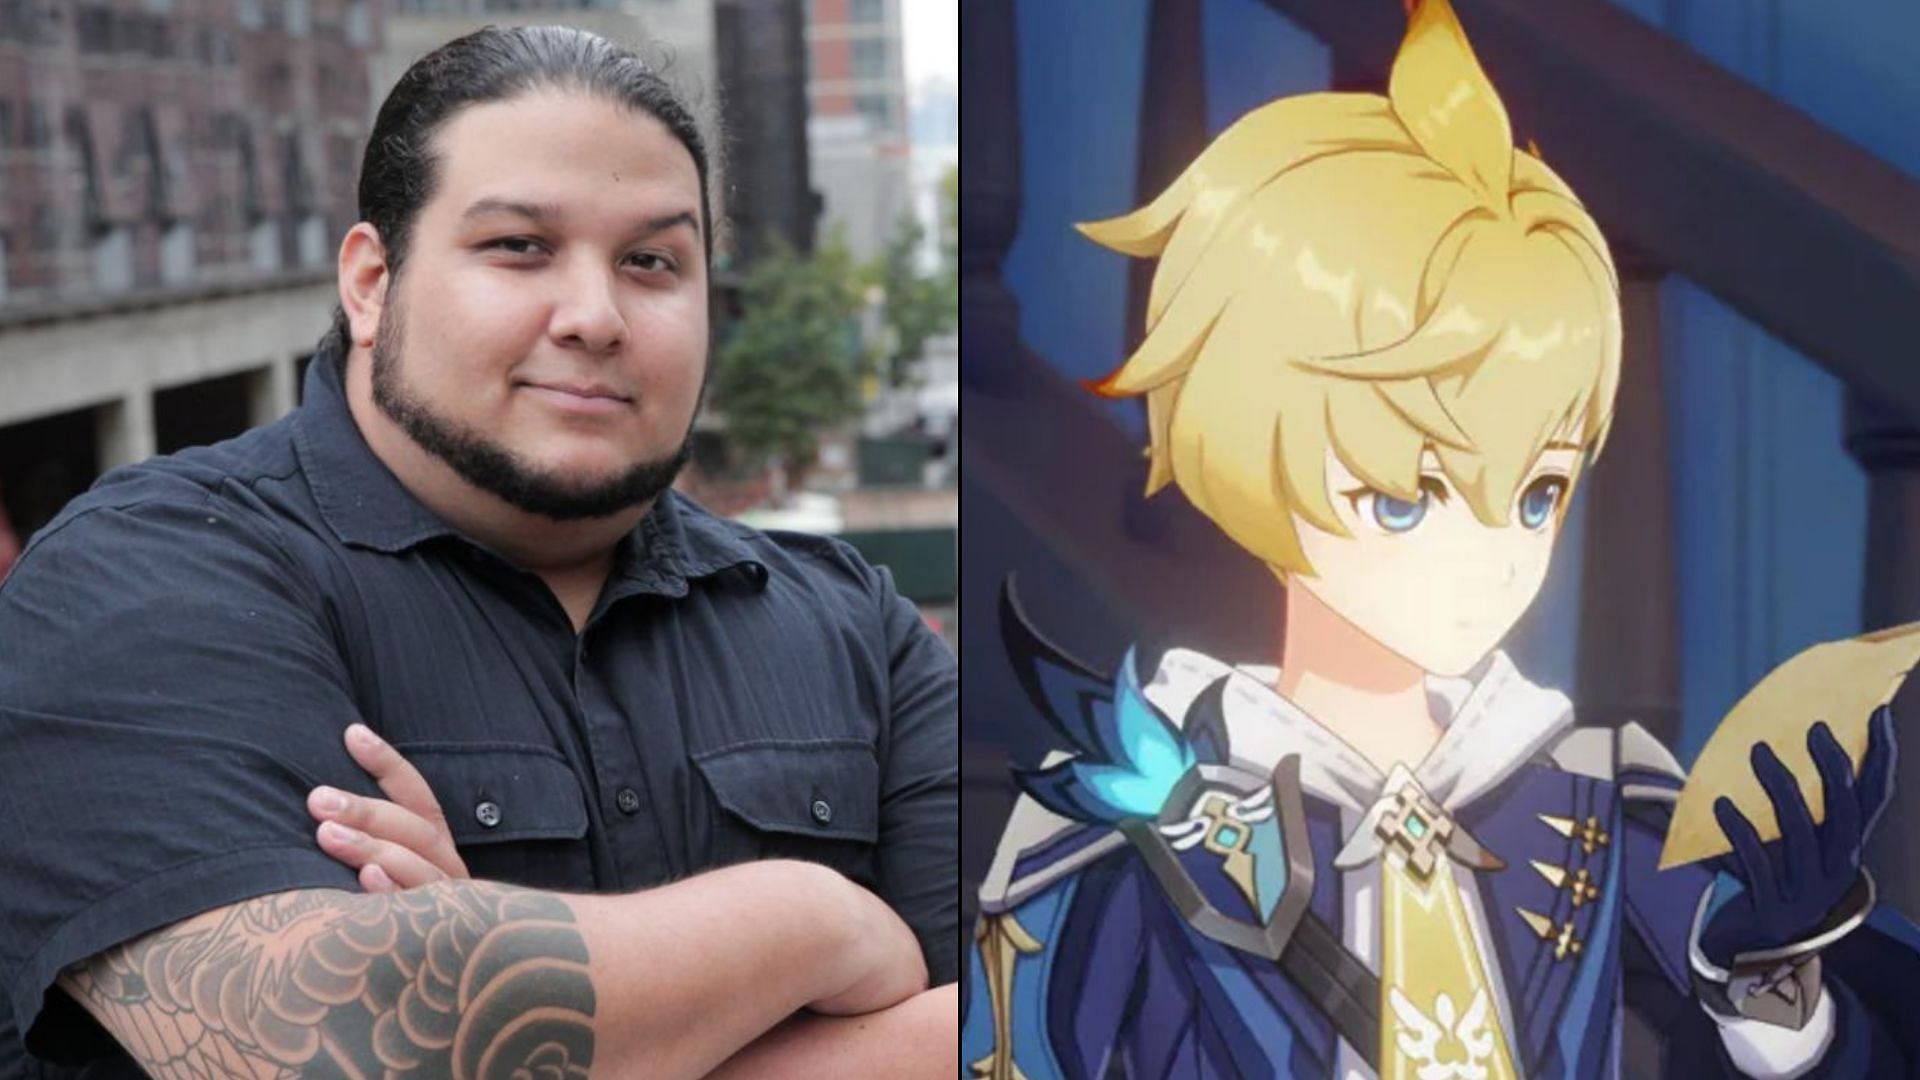 The voice actor and the new Genshin Impact character